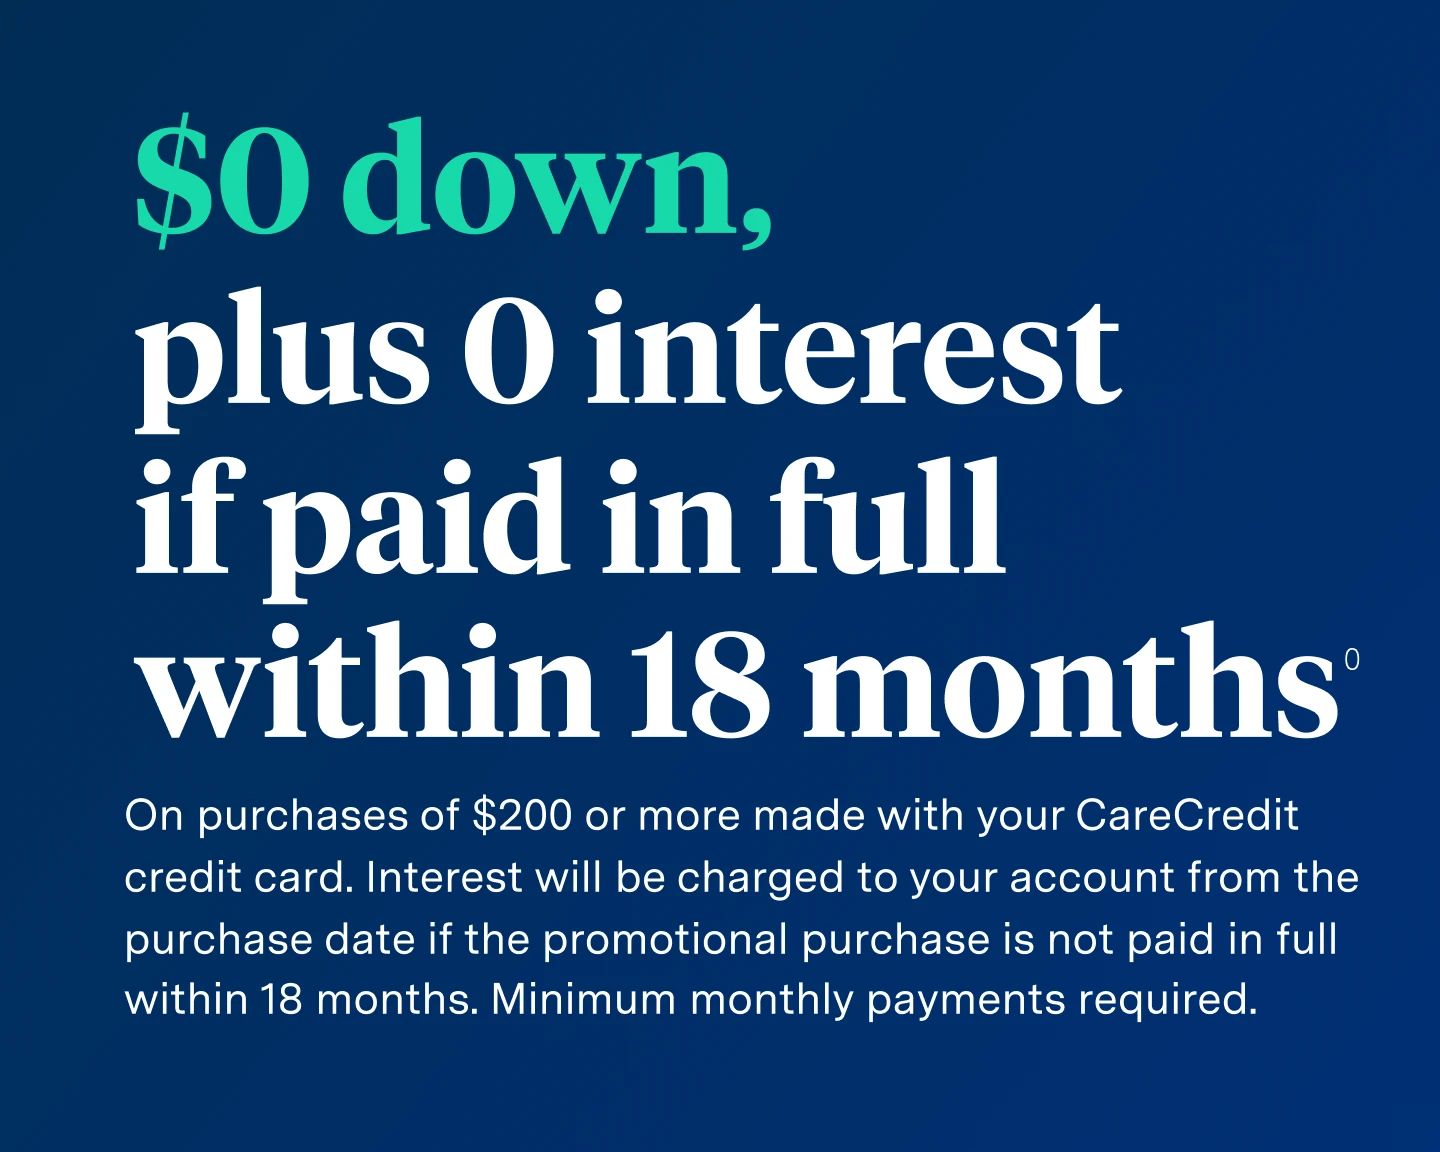 $0 down, plus 0 interest if paid in full within 18 months on purchases of $200 or more with your CareCredit credit card. Interest will be charged to your account from the purchase date if the promotional purchase is not paid in full within 18 months. Minimum monthly payments required.